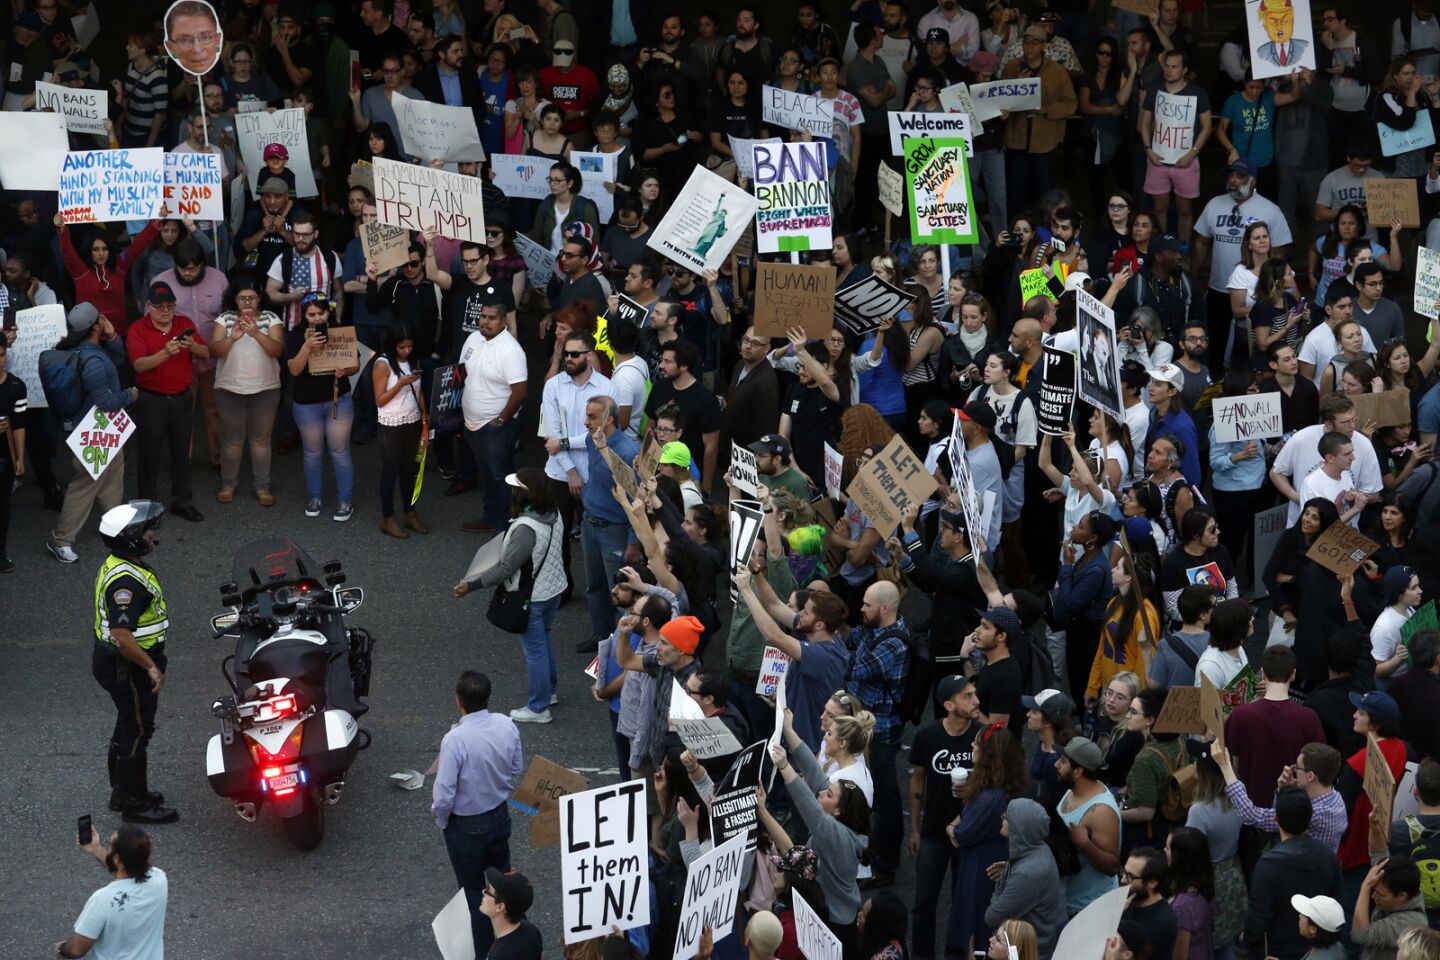 Protesters block LAX traffic, face off with police as they rally